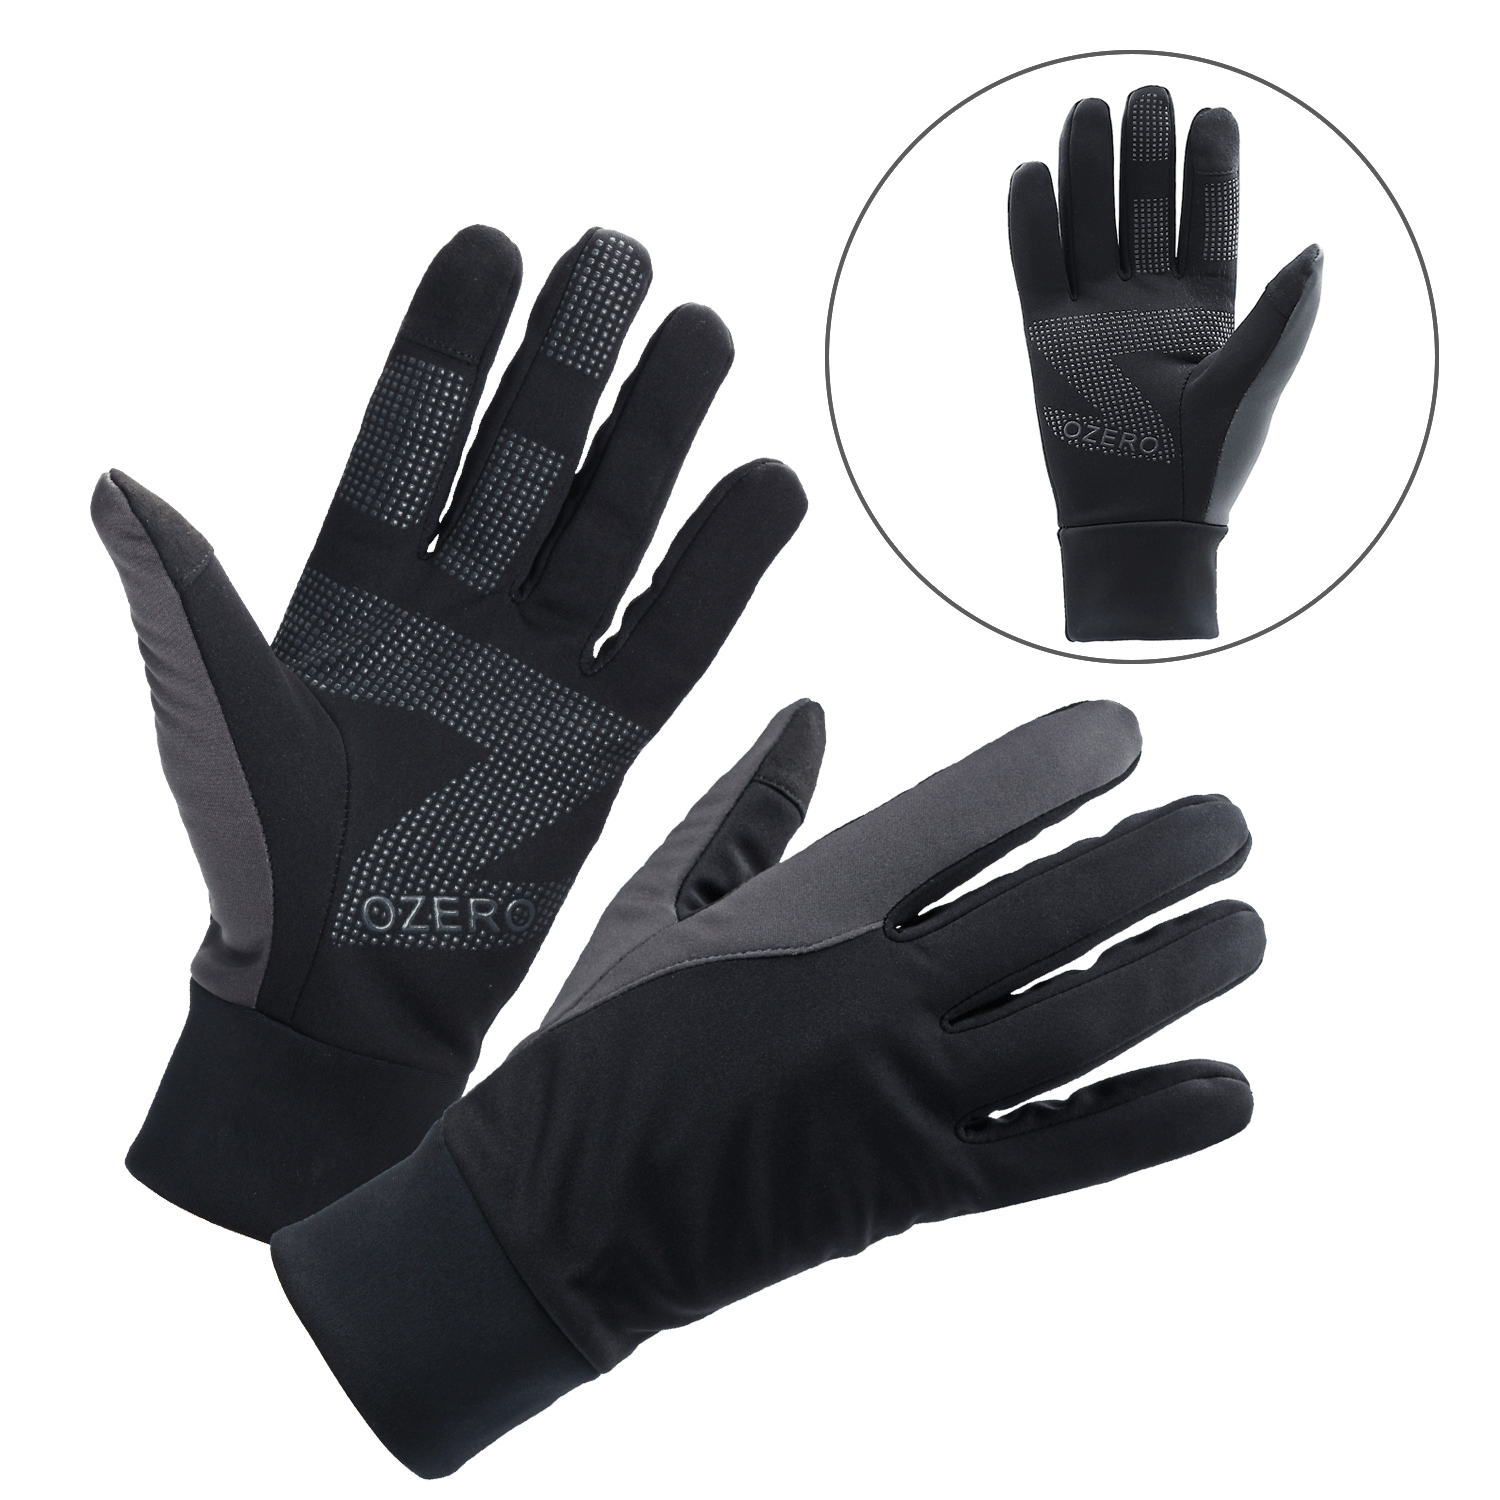 Wholesale Lot of 12 Touch Screen Gloves Smartphone Tablet Pad US Stock BLACK 